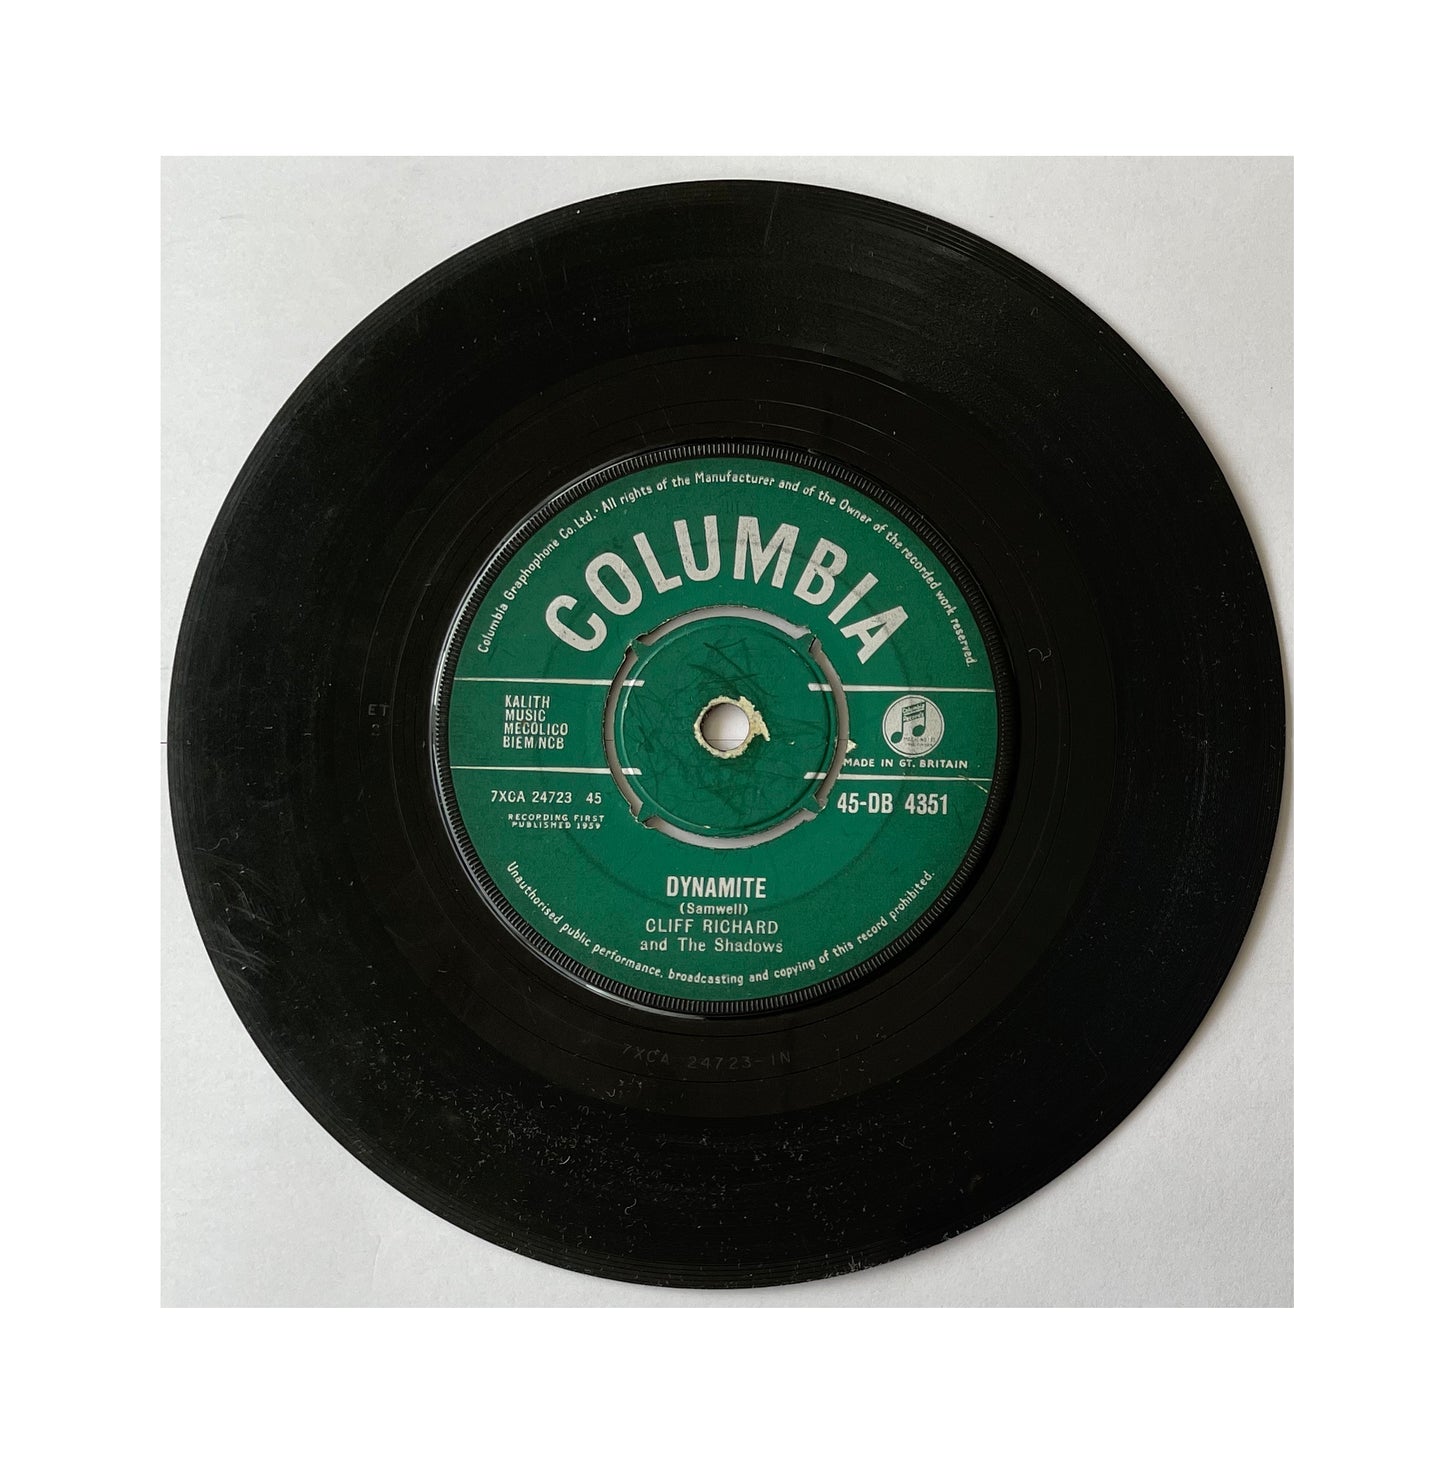 Vintage 1959 Cliff Richard And The Shadows A.Side Travellin Light, B.Side Dynamite, Columbia Records Label 7 Inch Vinyl Record